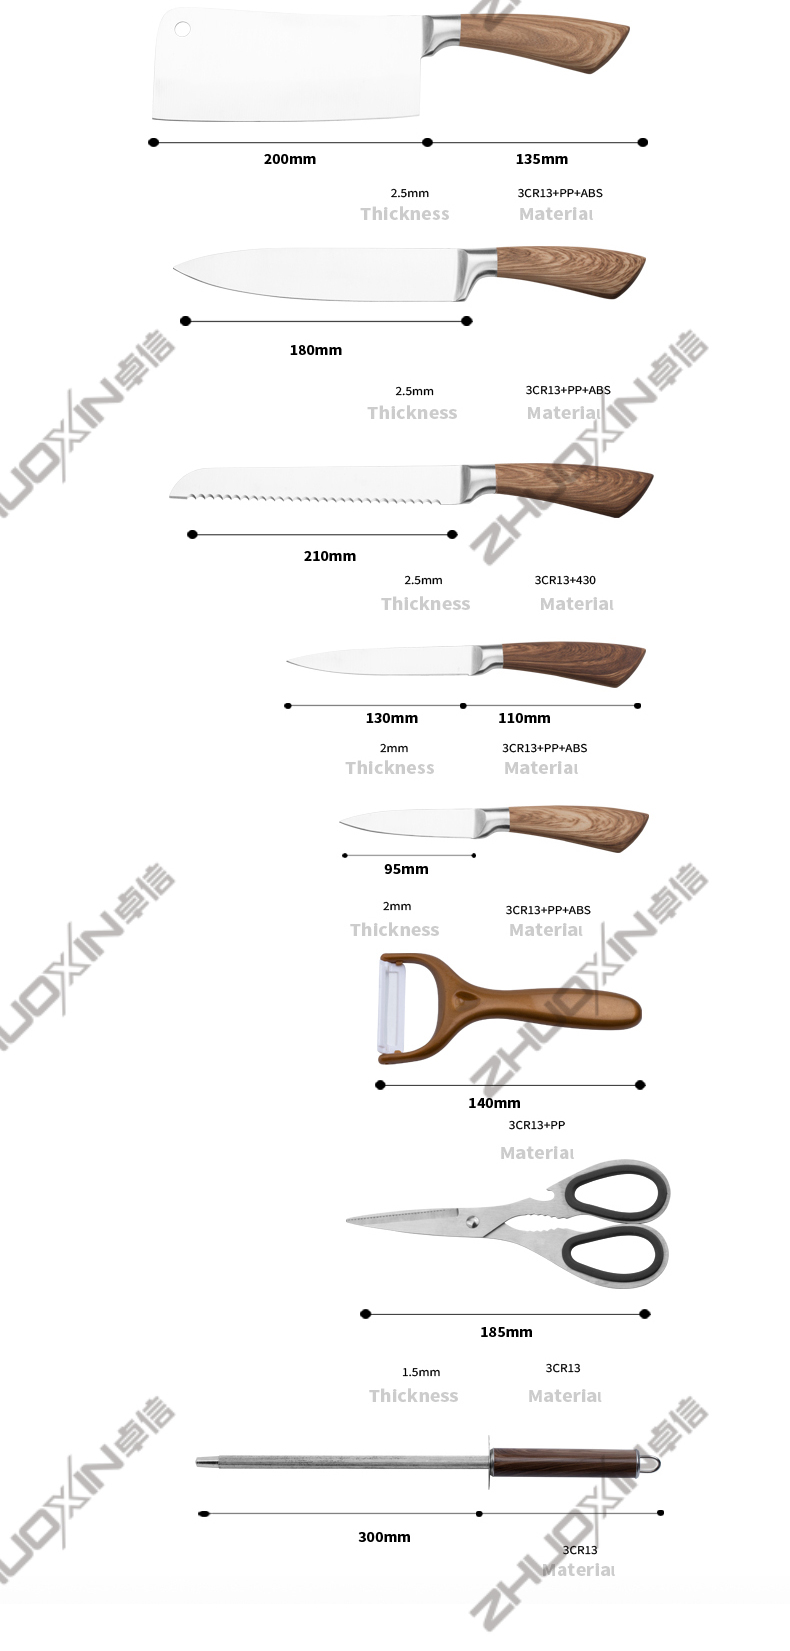 Japanese bread knife vendor,global bread knife vendor,knife bread vendor with BSCI audit!-ZX | kitchen knife,Kitchen tools,Silicone Cake Mould,Cutting Board,Baking Tool Sets,Chef Knife,Steak Knife,Slicer knife,Utility Knife,Paring Knife,Knife block,Knife Stand,Santoku Knife,toddler Knife,Plastic Knife,Non Stick Painting Knife,Colorful Knife,Stainless Steel Knife,Can opener,bottle Opener,Tea Strainer,Grater,Egg Beater,Nylon Kitchen tool,Silicone Kitchen Tool,Cookie Cutter,Cooking Knife Set,Knife Sharpener,Peeler,Cake Knife,Cheese Knife,Pizza Knife,Silicone Spatular,Silicone Spoon,Food Tong,Forged knife,Kitchen Scissors,cake baking knives,Children’s Cooking knives,Carving Knife